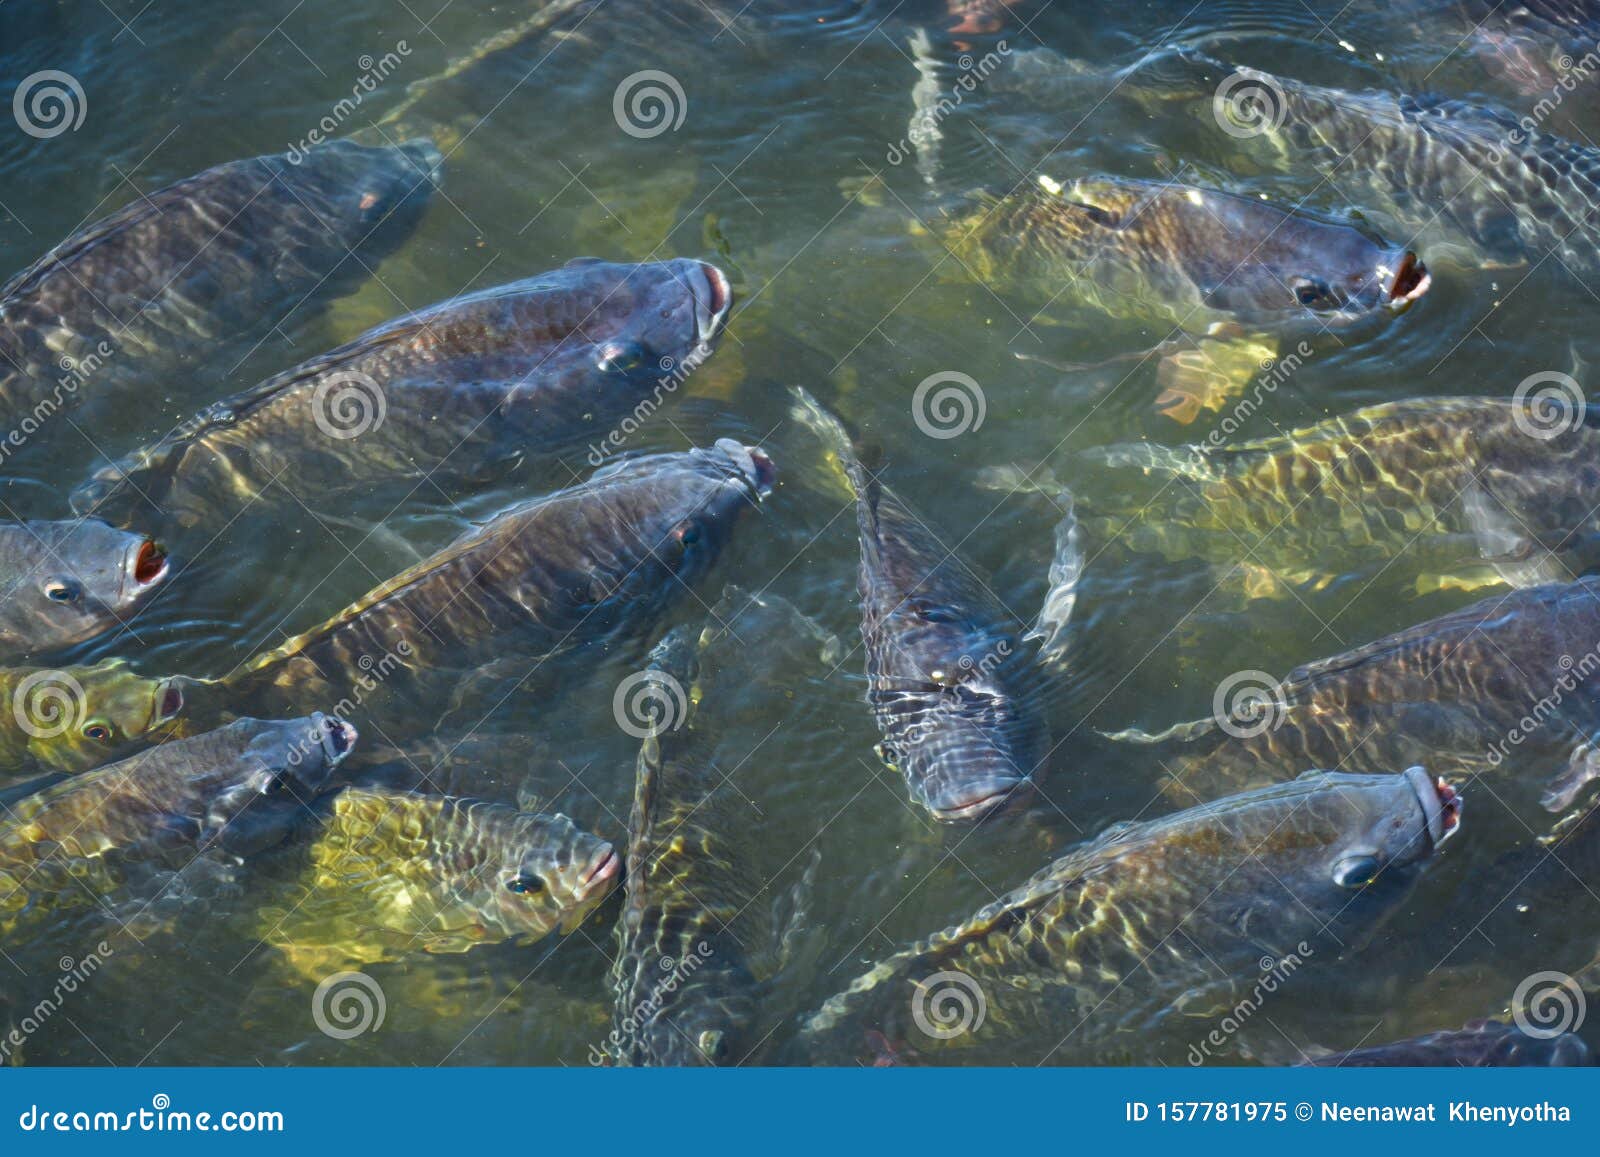 Tilapia in the Pond is Waiting for Feeding. Stock Image - Image of